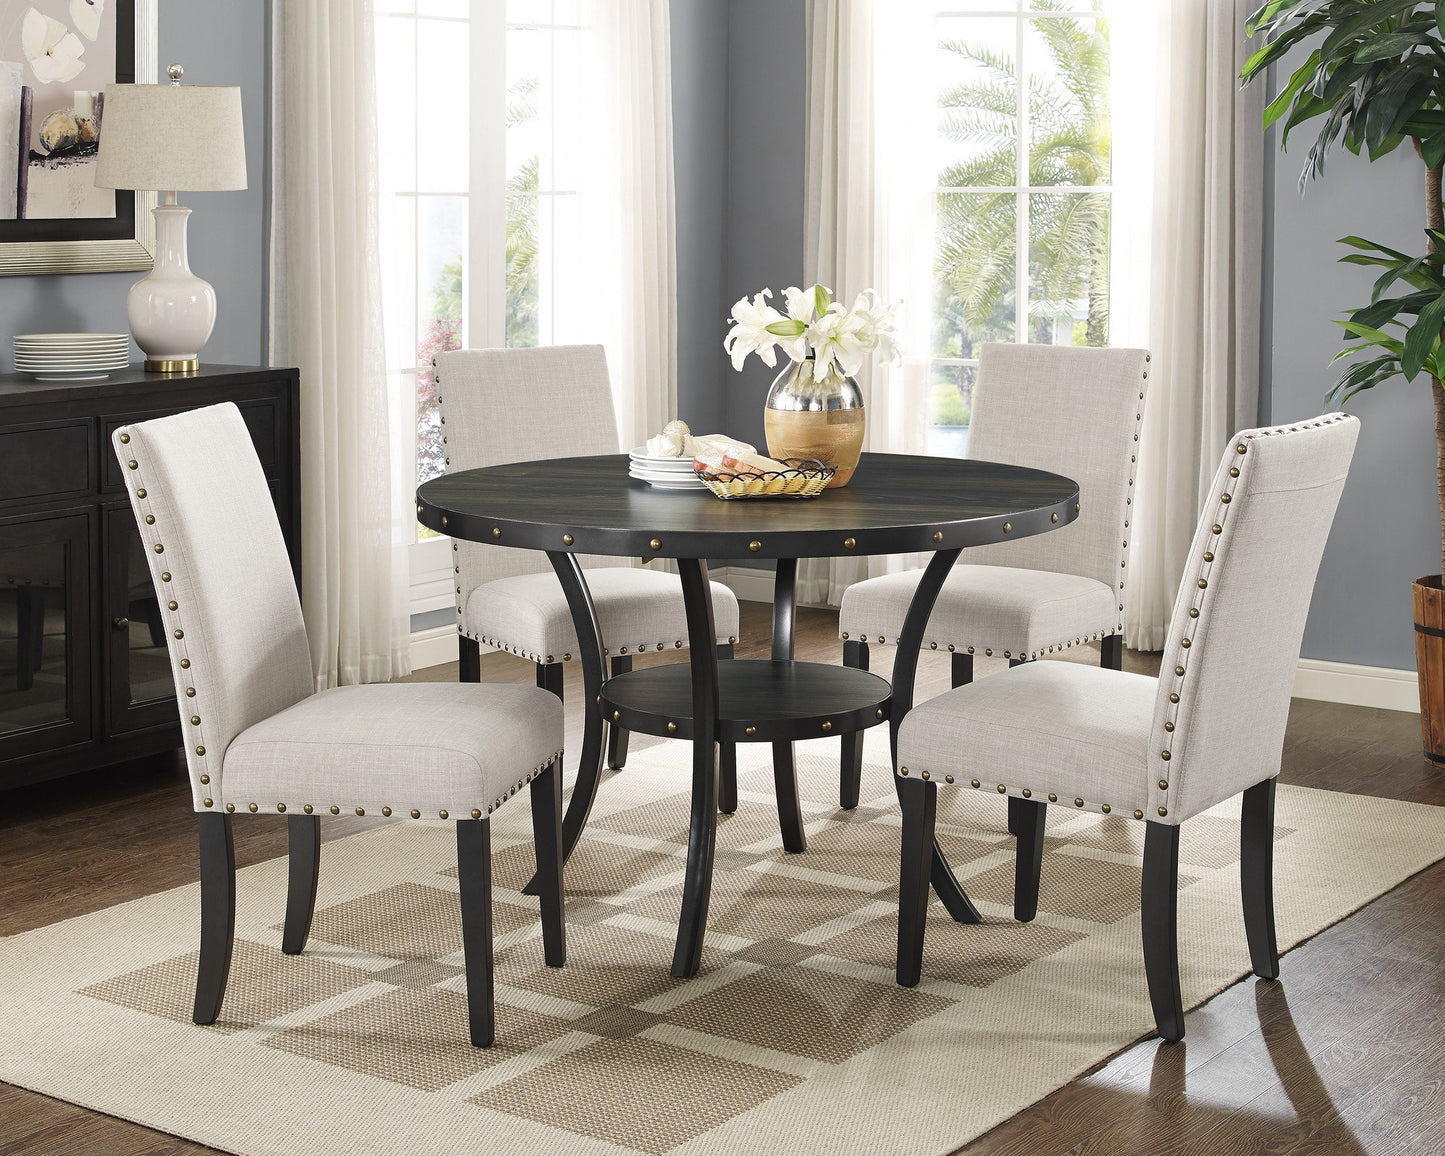 Biony Tan Fabric Dining Chairs with Nailhead Trim, Set of 2